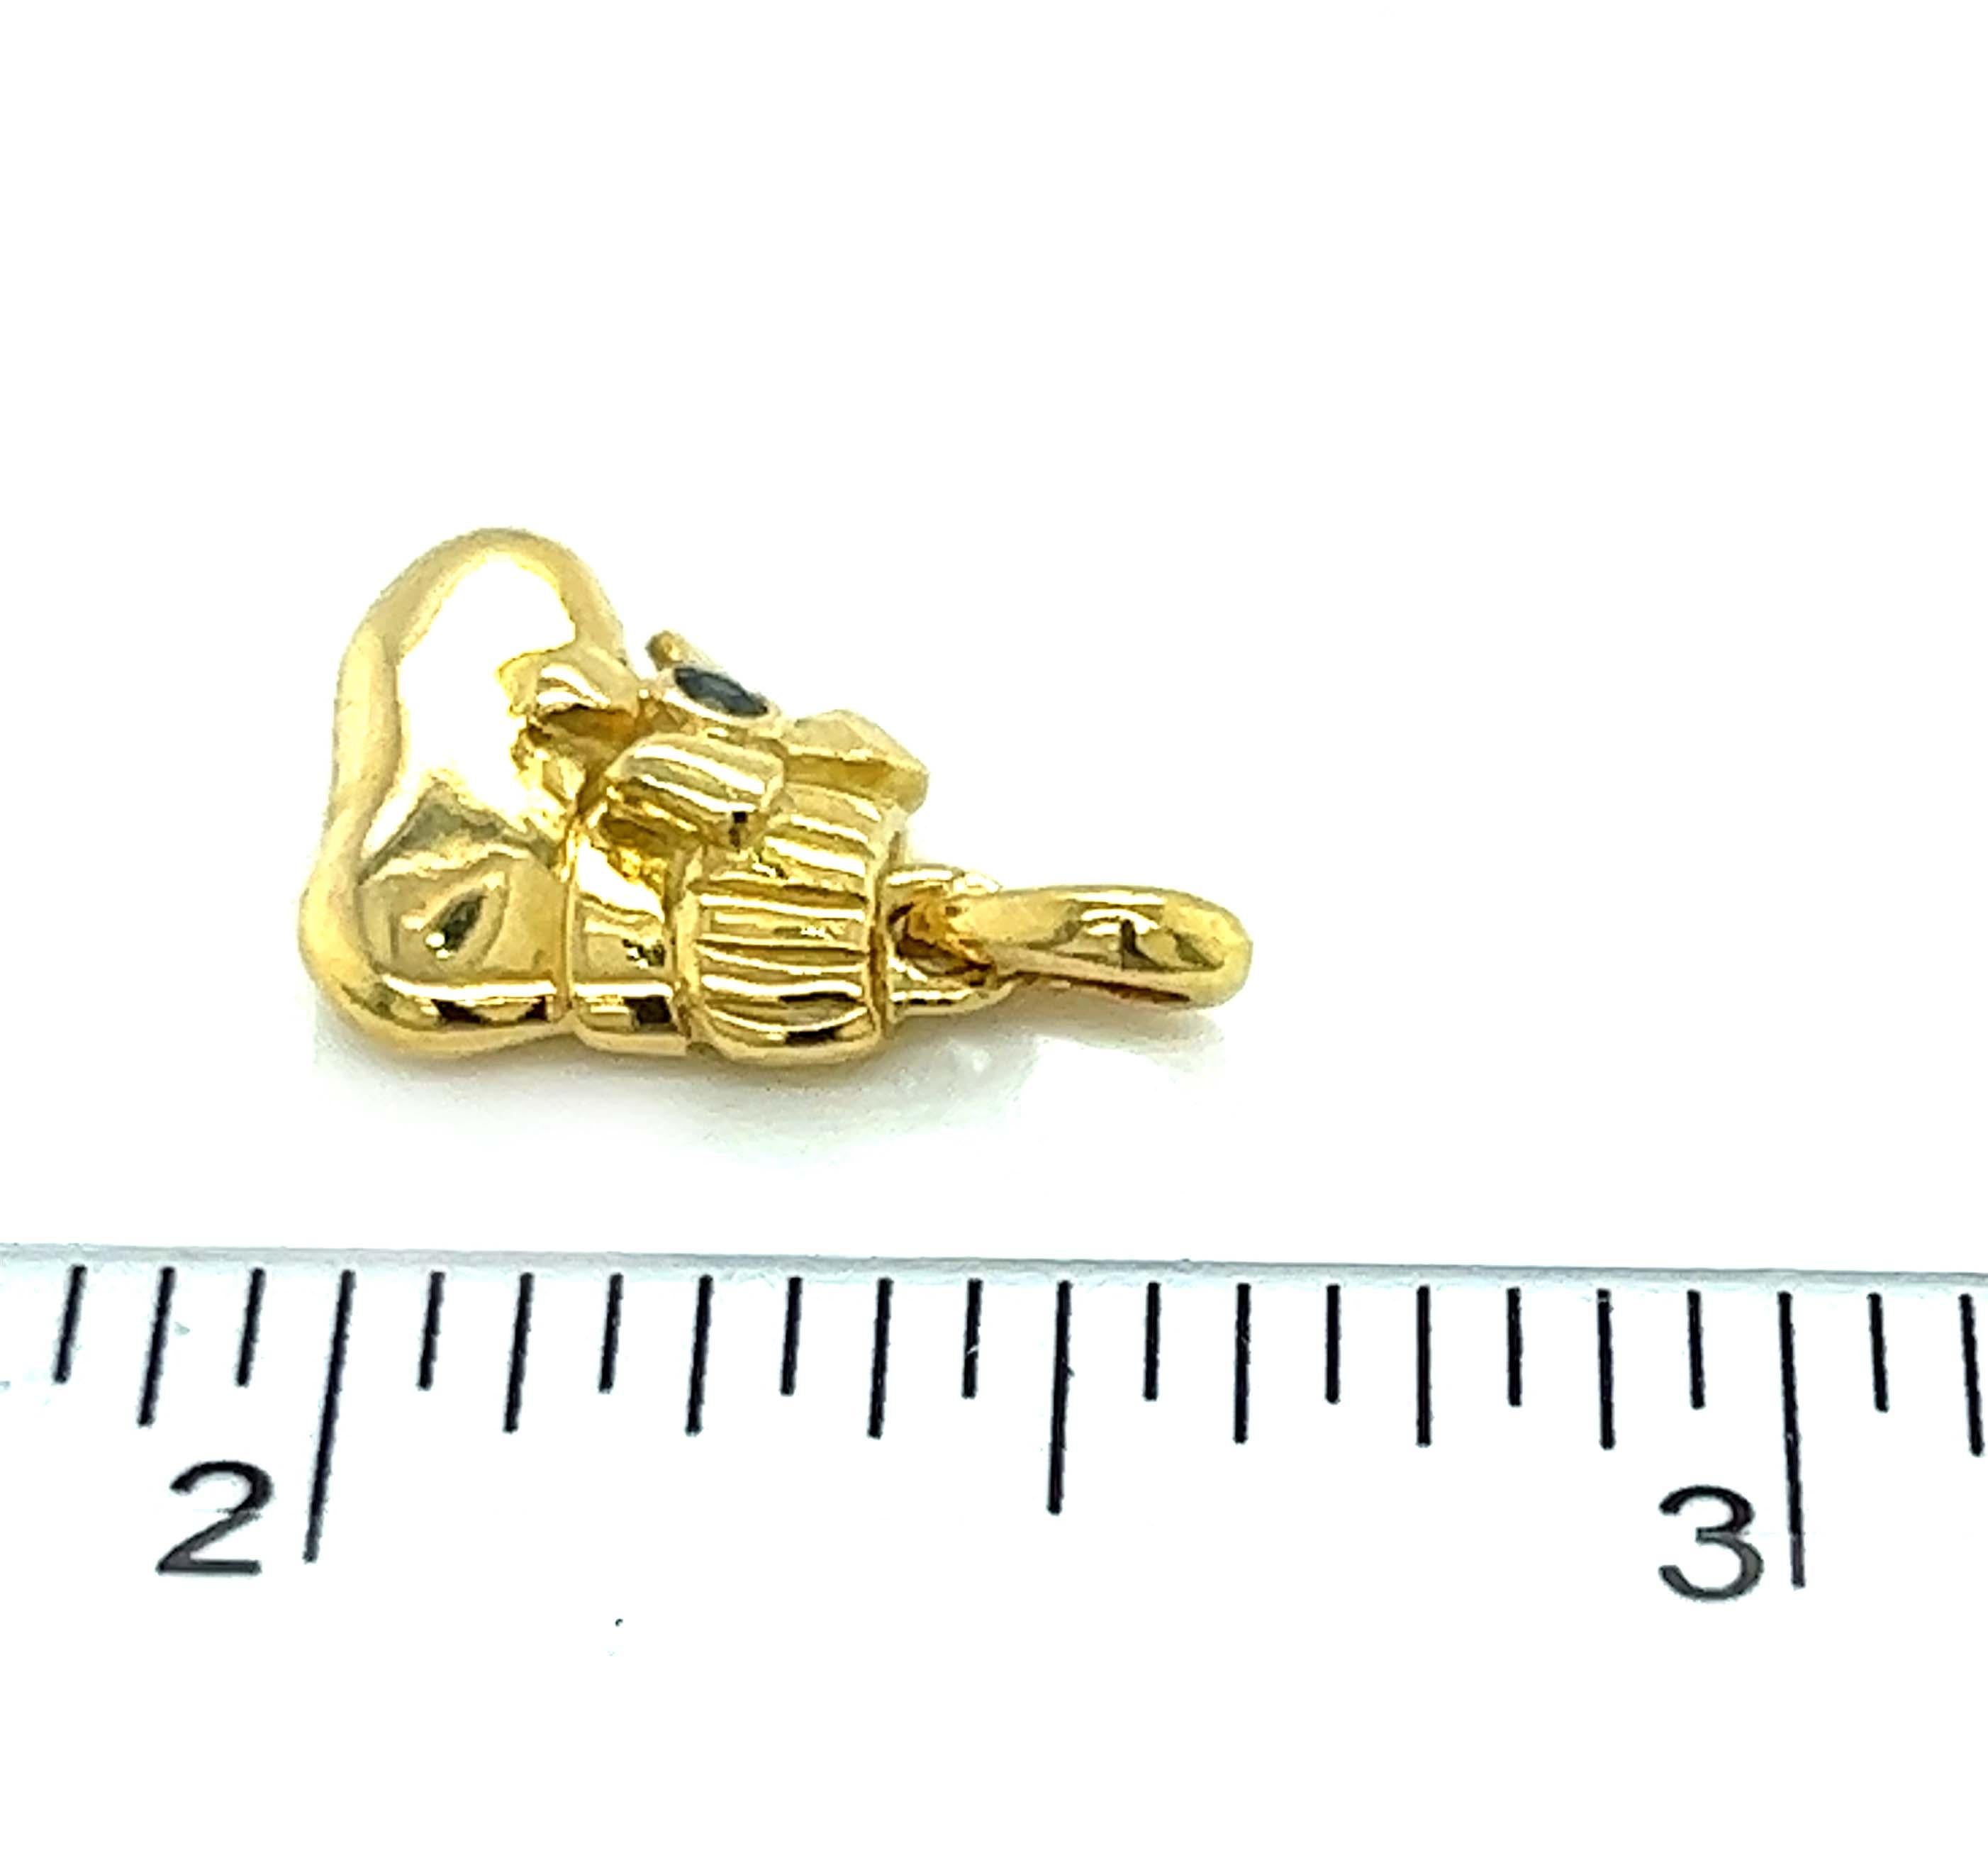 Van Cleef & Arpels Sapphire 18k Yellow Gold Baby Booty Charm Pendant In Excellent Condition For Sale In Boca Raton, FL